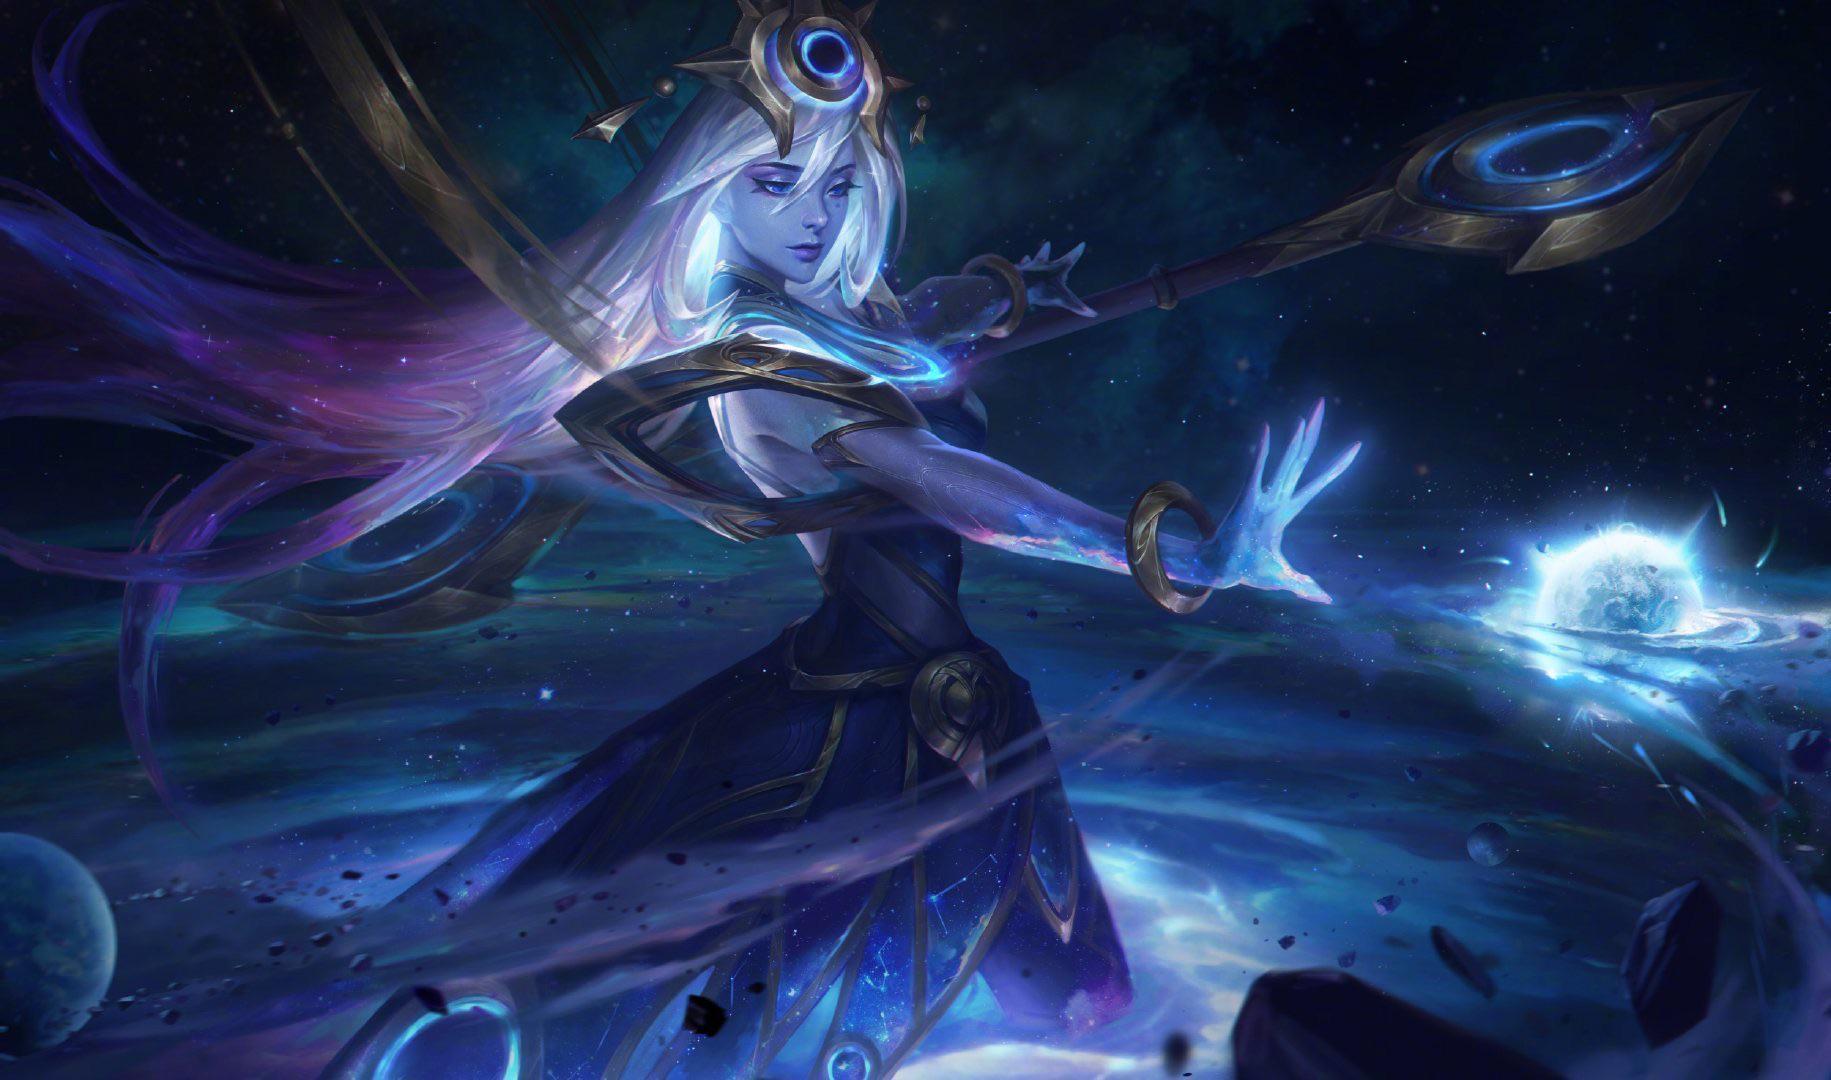 Lux was one of champs cut from the TFT unit roster in the Patch 10.12 mid-set update.